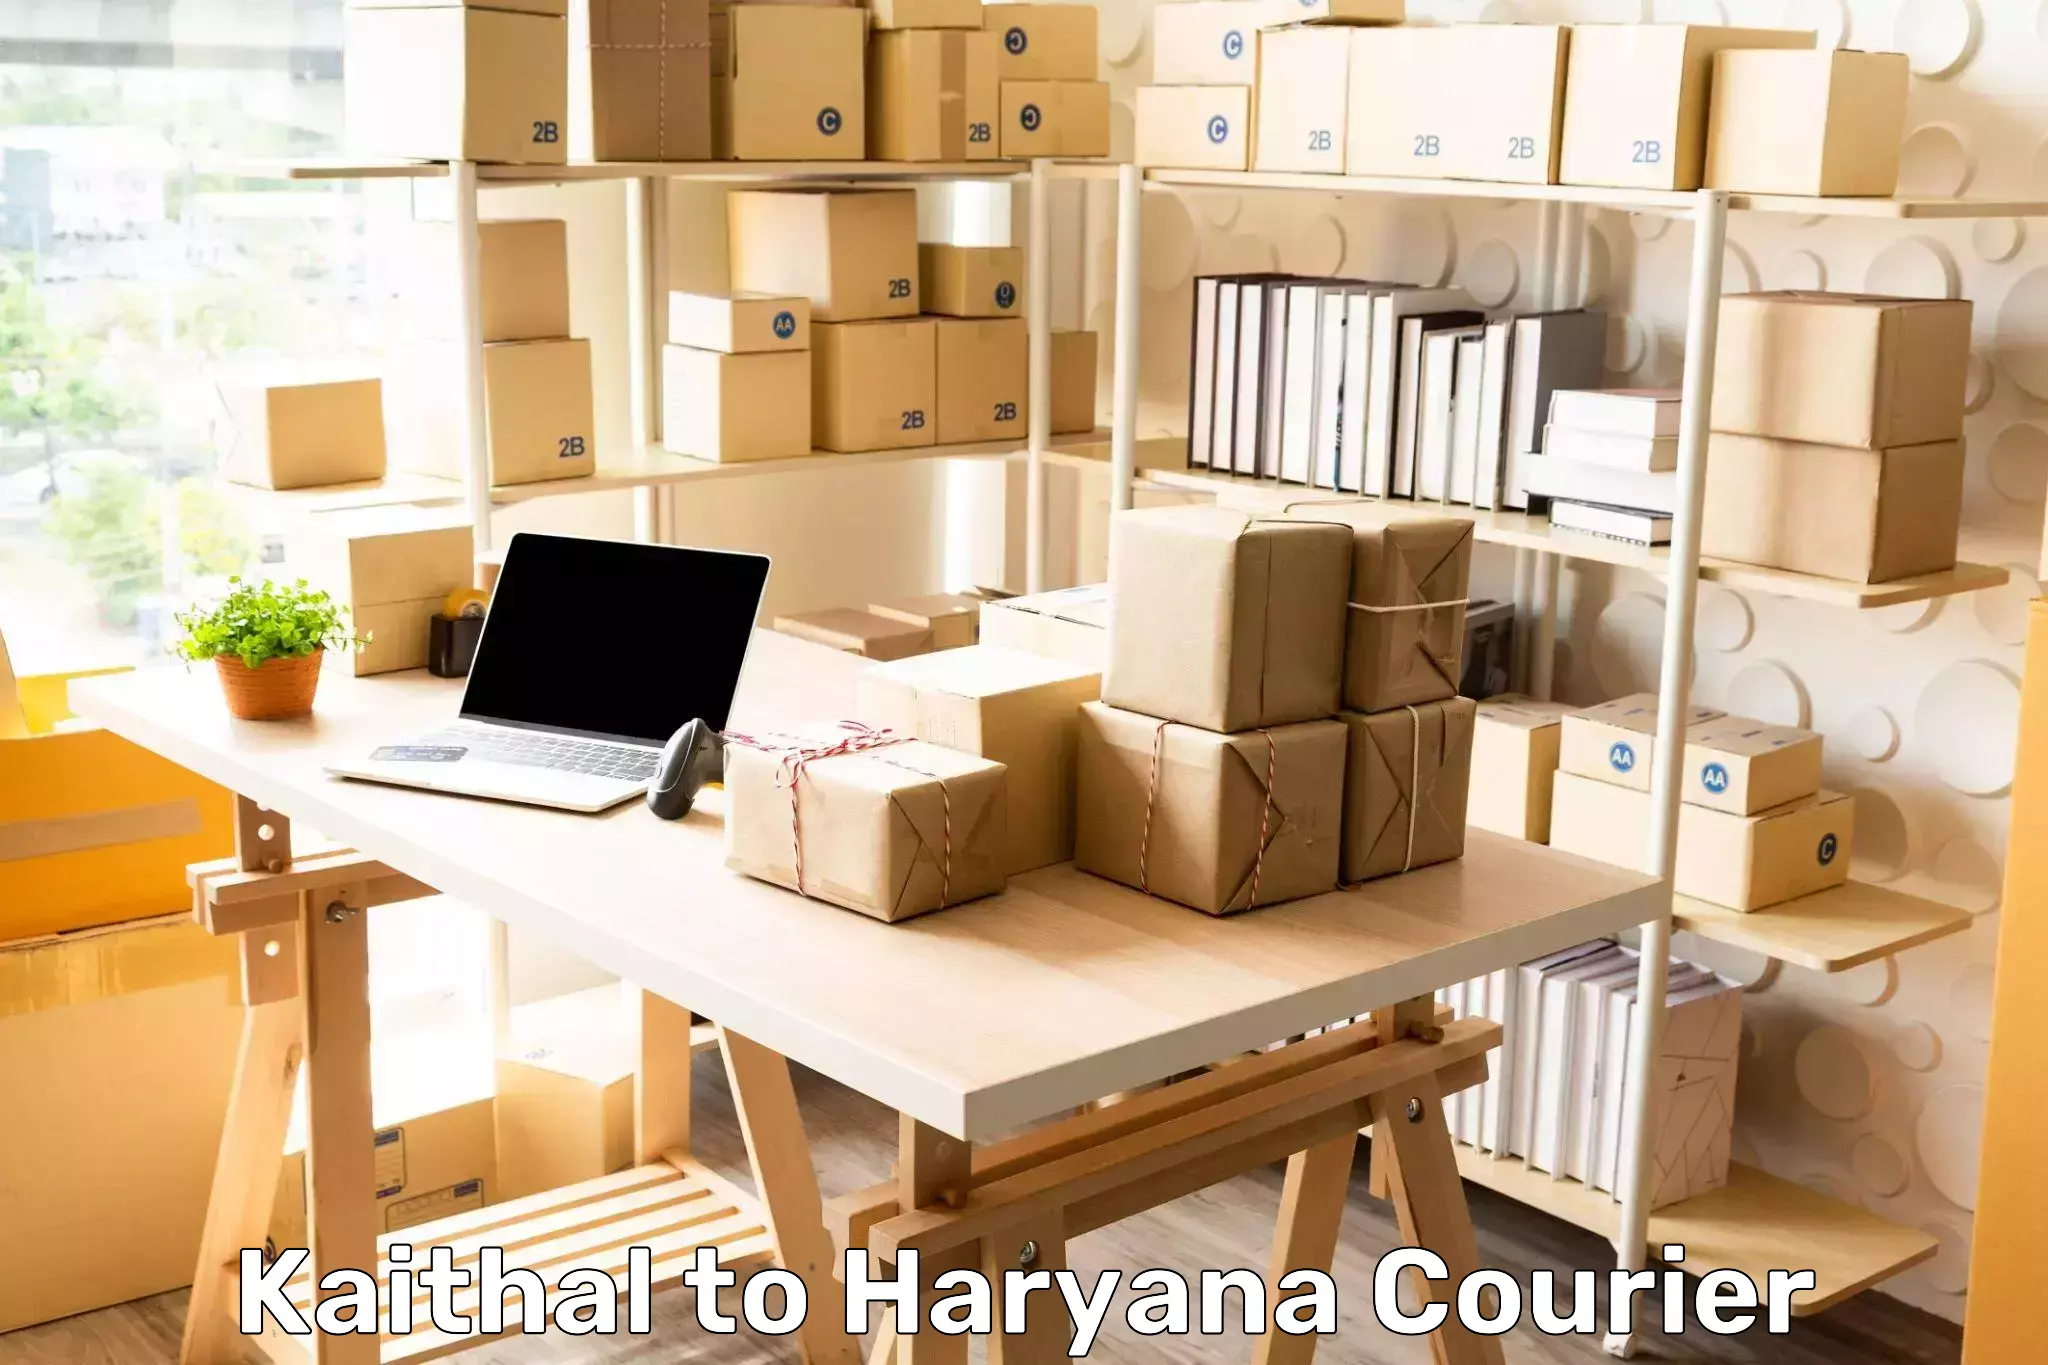 Residential courier service Kaithal to Ambala